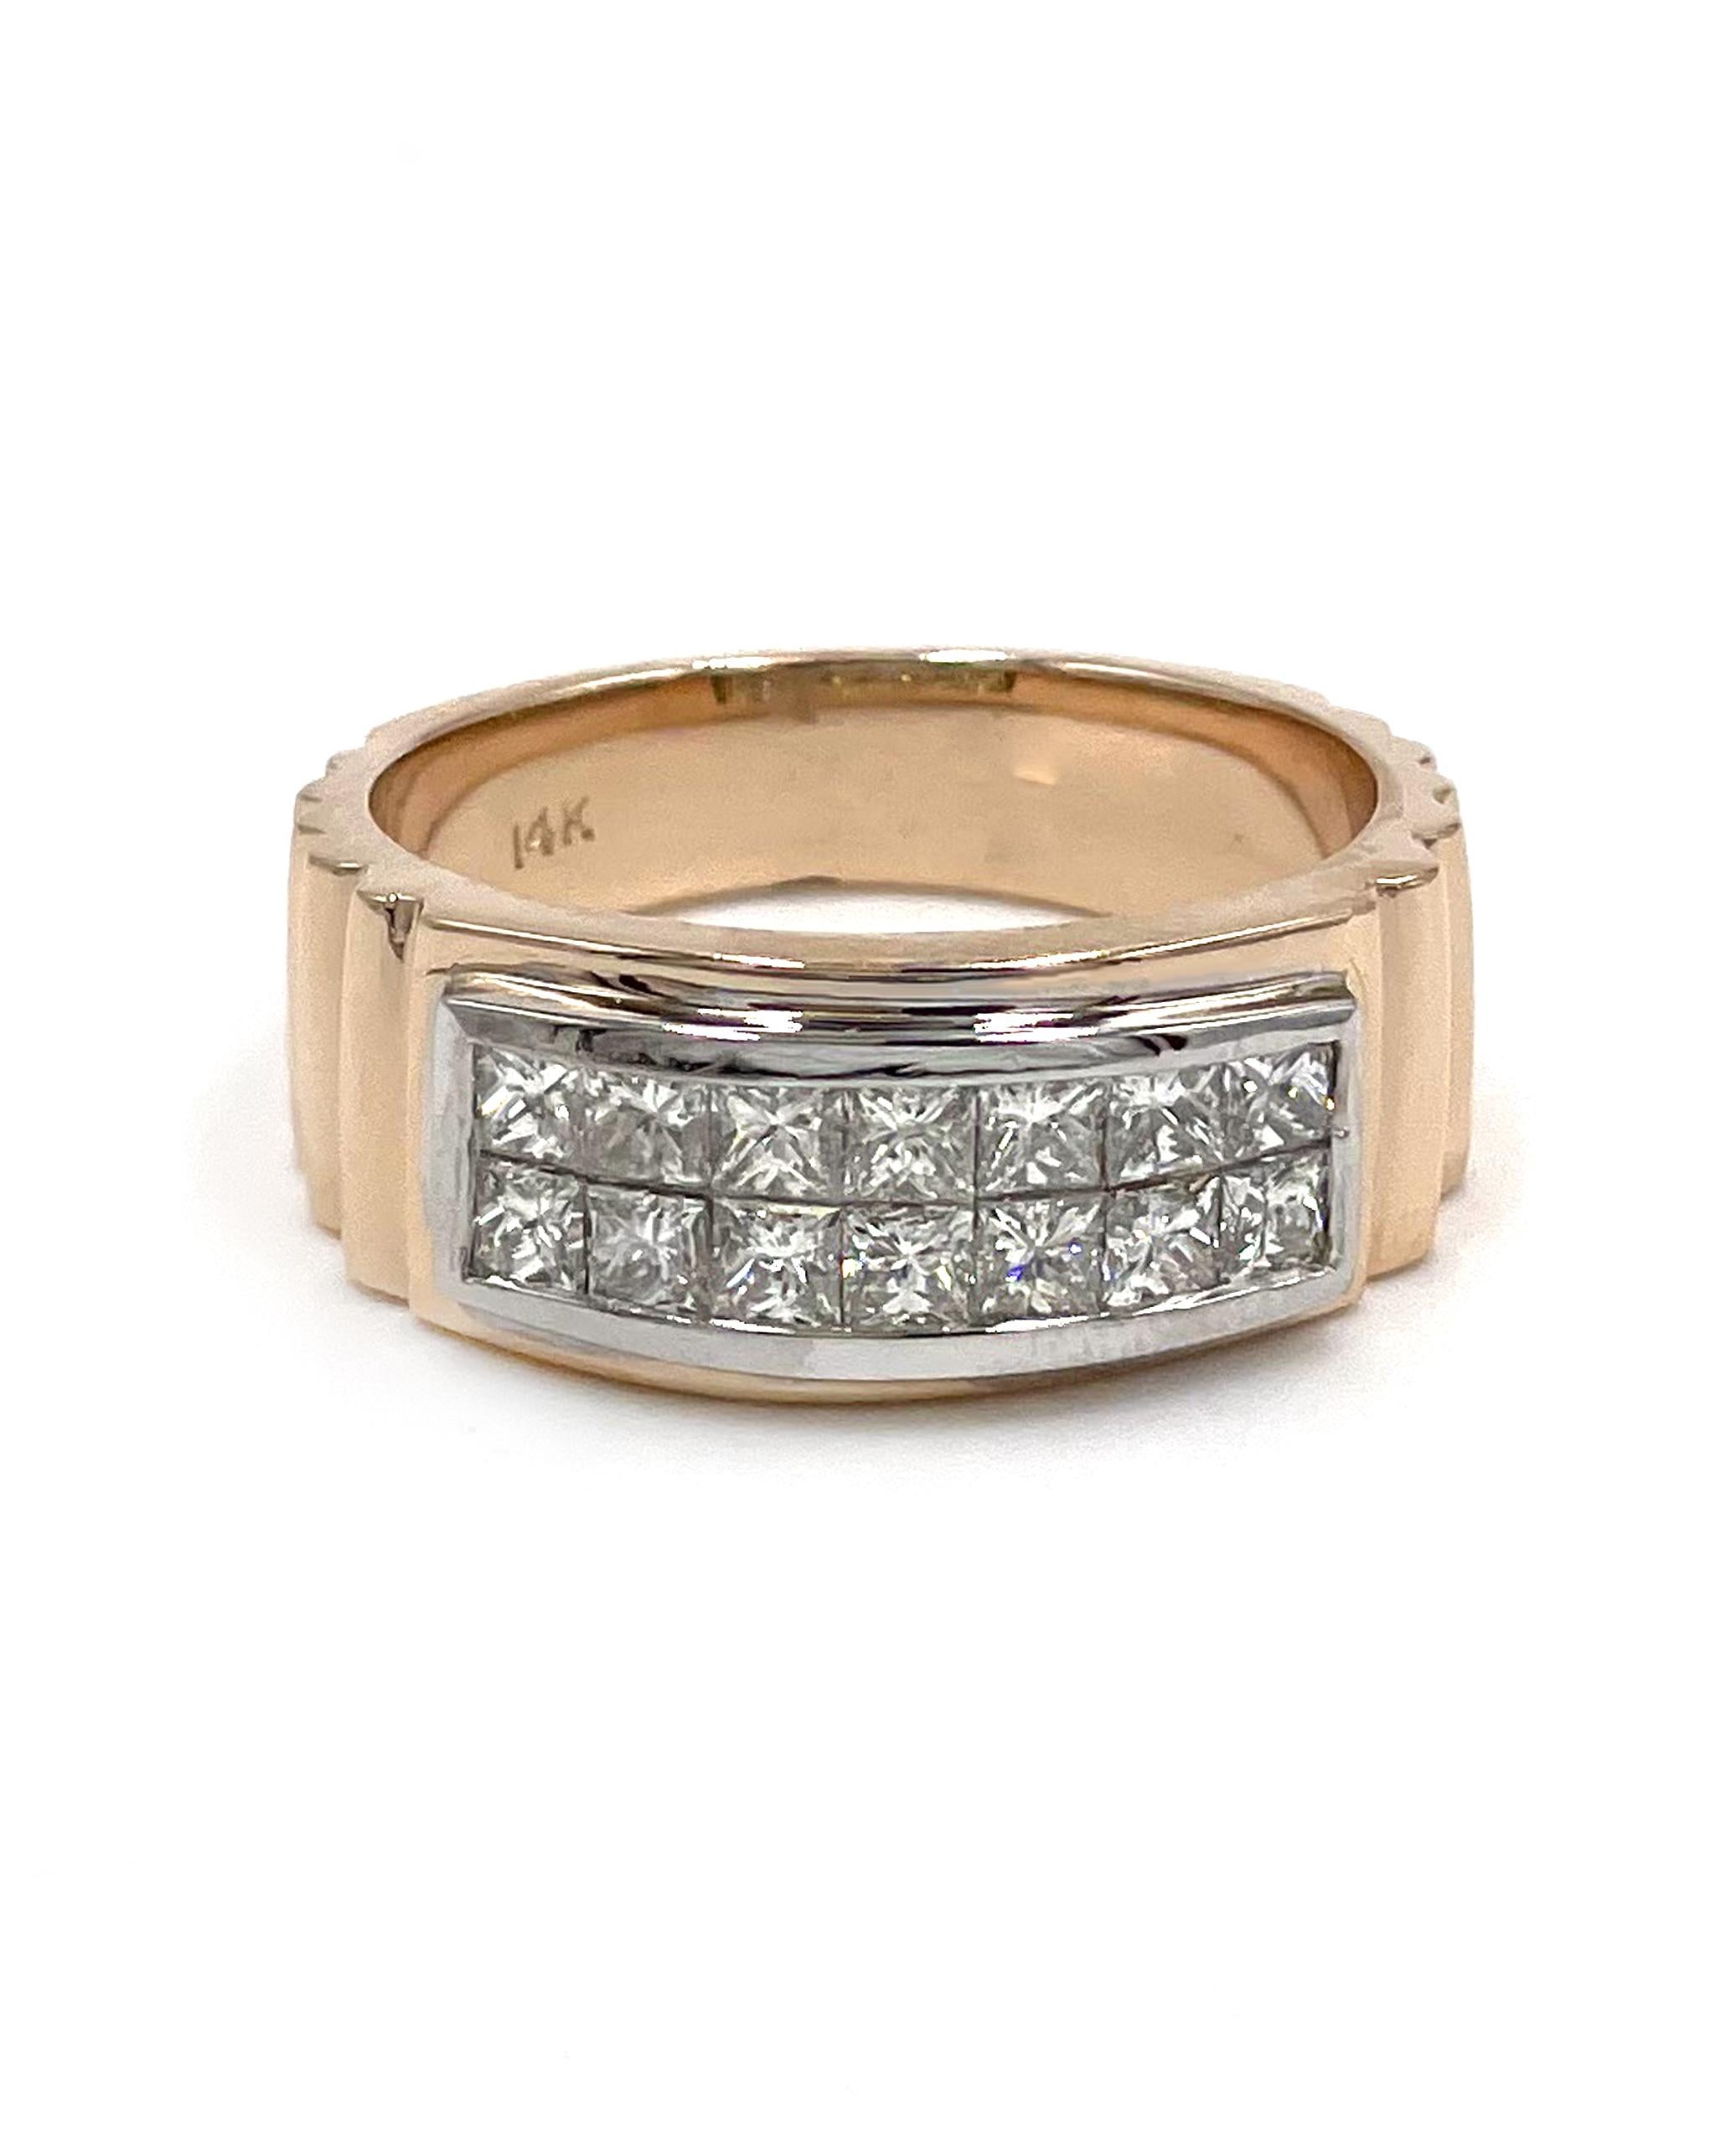 14K rose and white gold gents ring with 14 invisibly set princess cut diamonds 1.45 carats total weight. G color, VS clarity.

*Finger size: 10.5
*Width 9.4mm and tapers down to 6.7mm